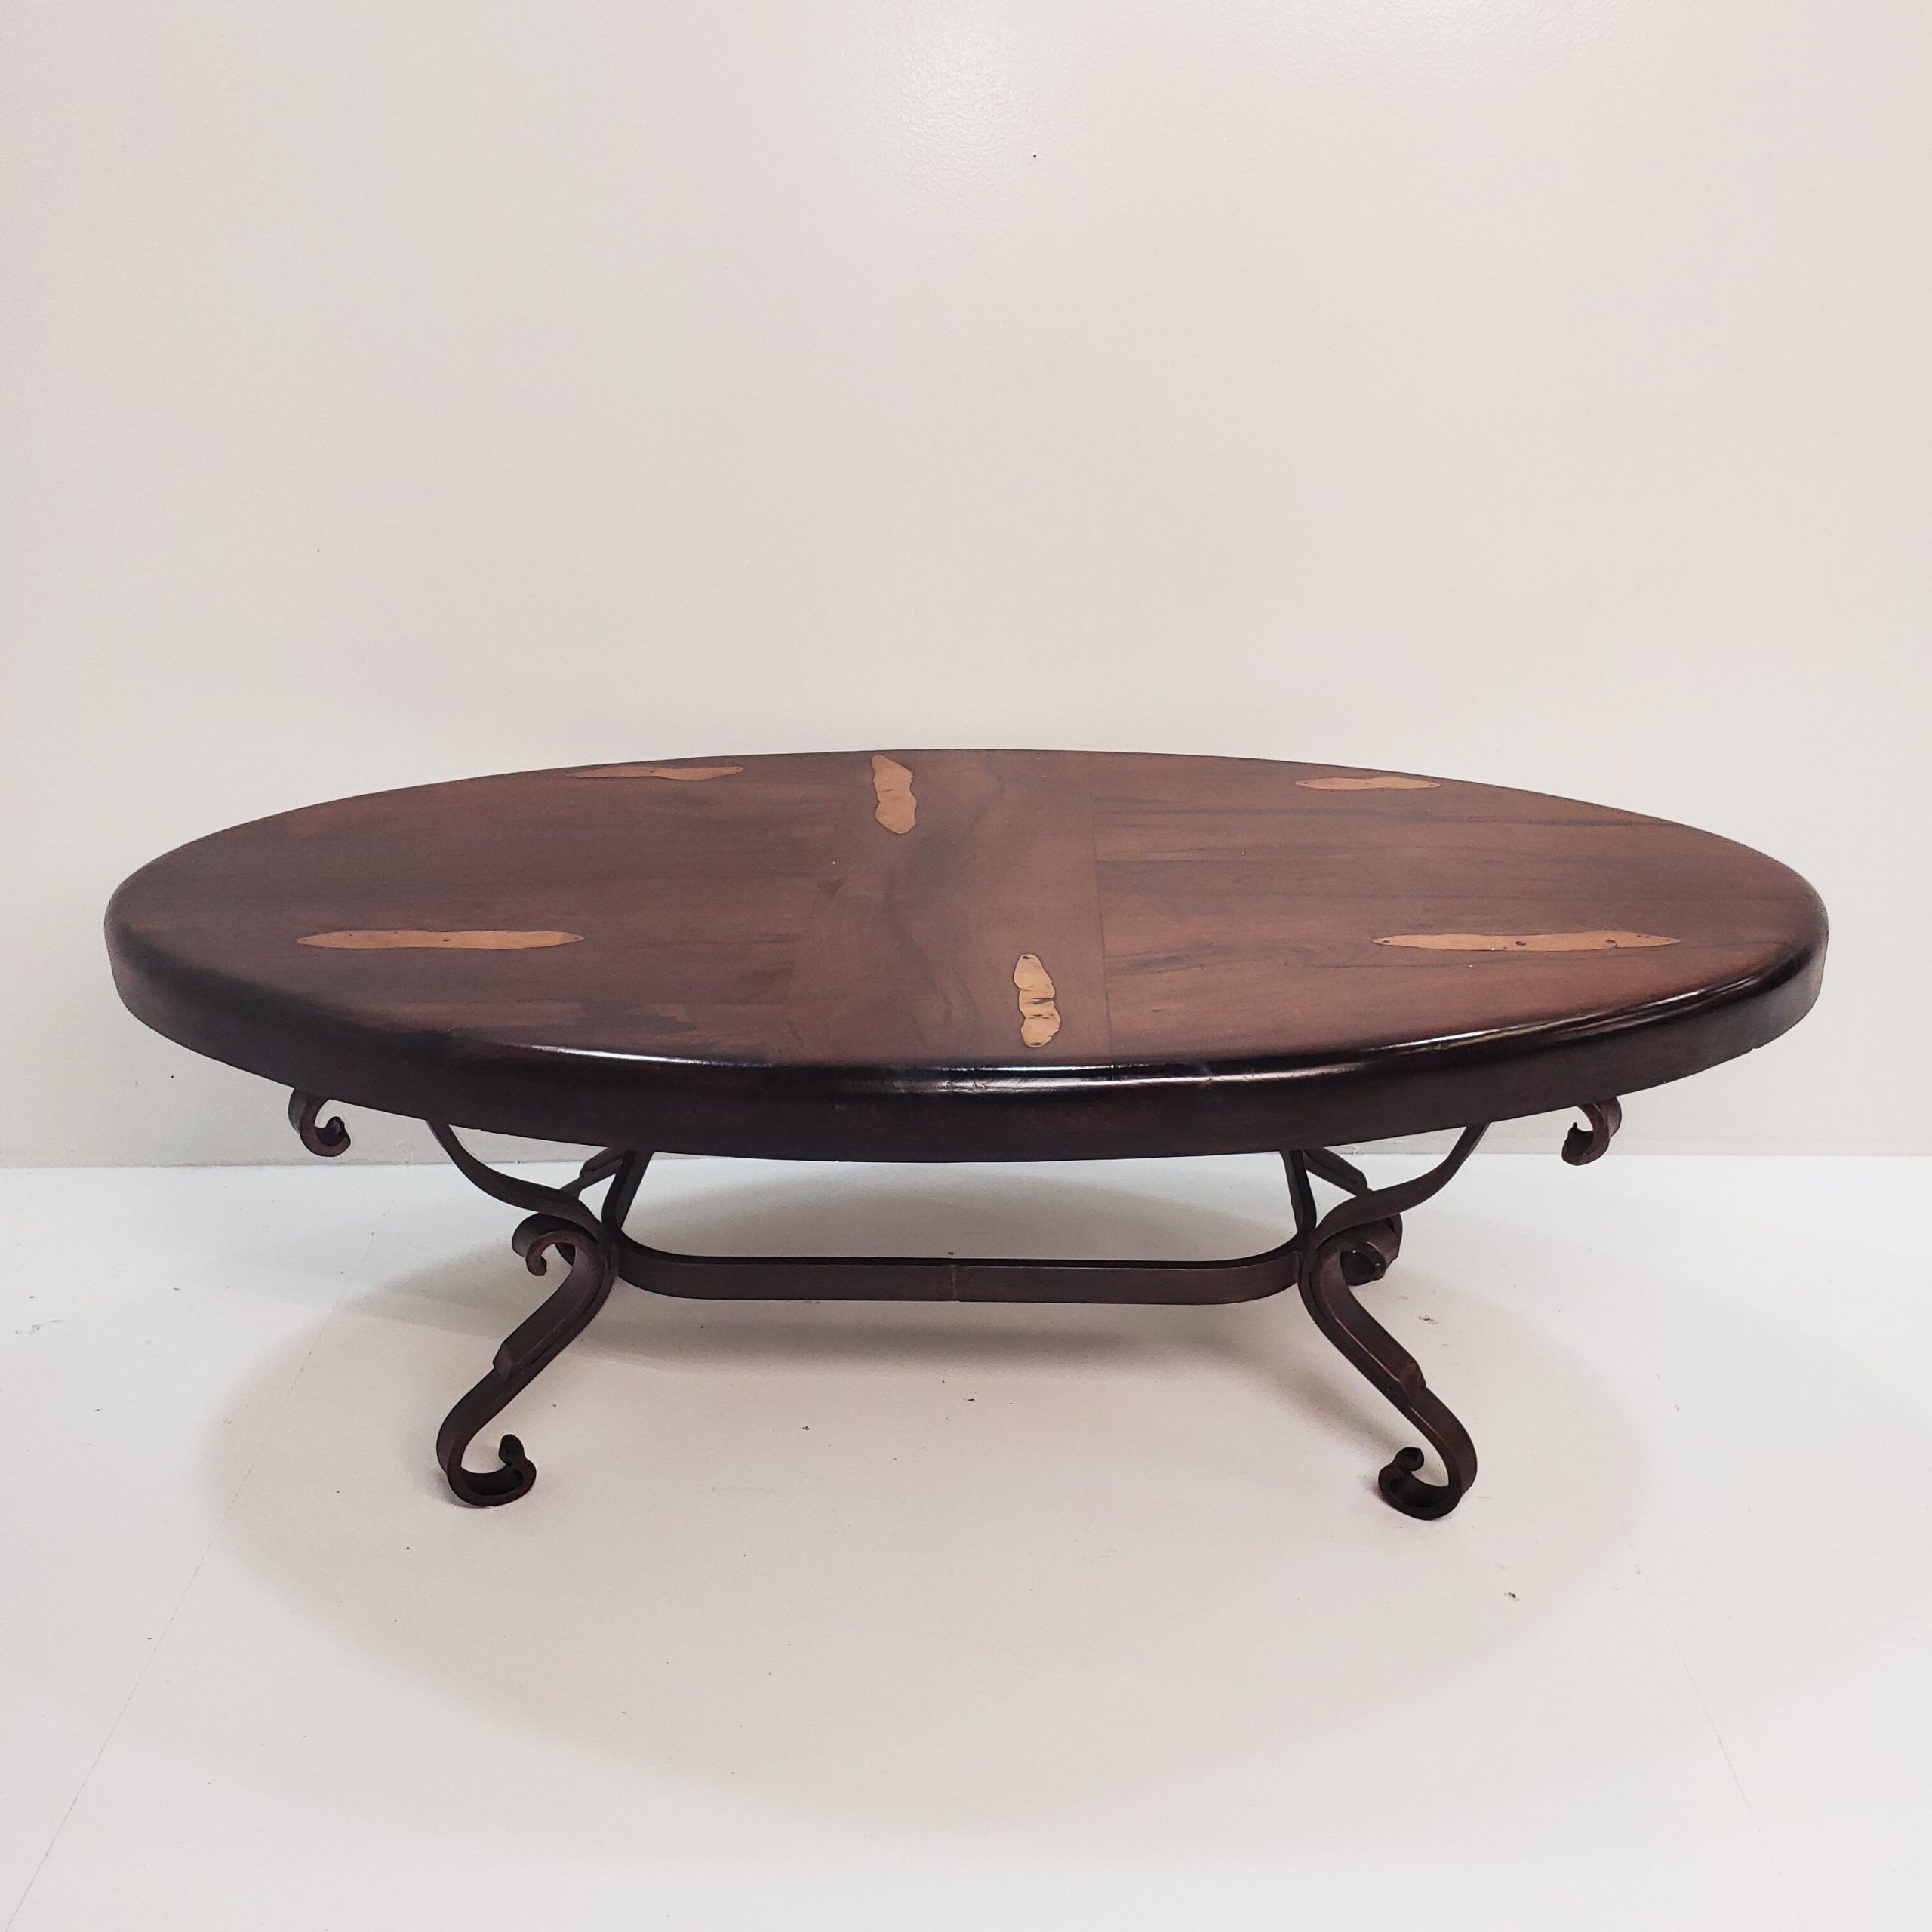 Oval Wrought Iron Coffee Table – B T Small Coffee Table Inside Oval Aged Black Iron Coffee Tables (View 5 of 15)